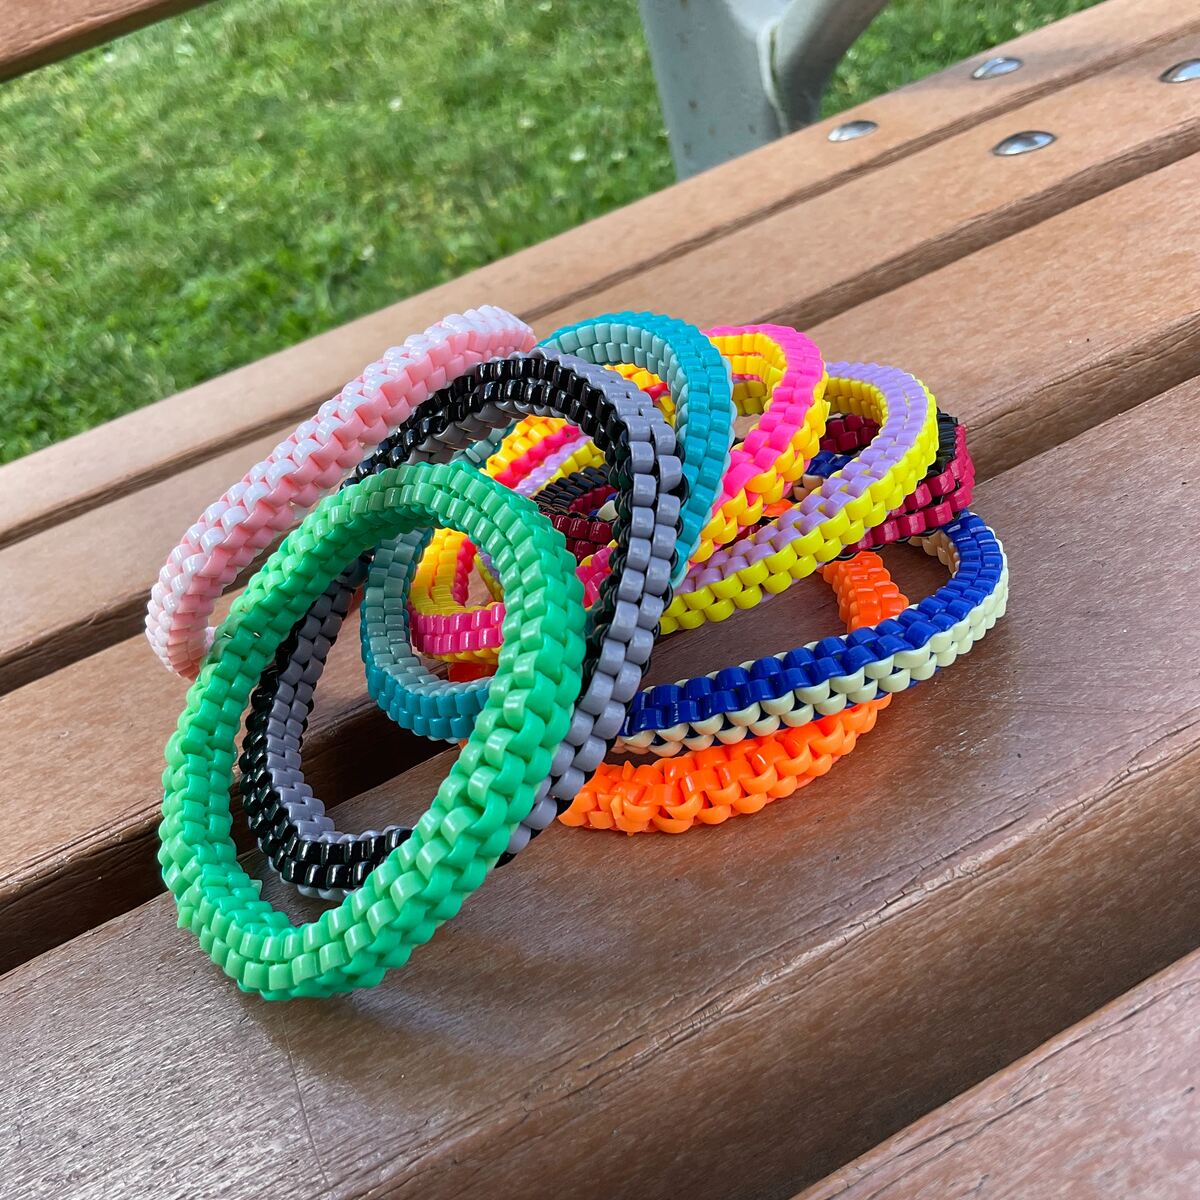 Wrist Adornments: Crafting Stylish Bracelets With Lanyard Techniques